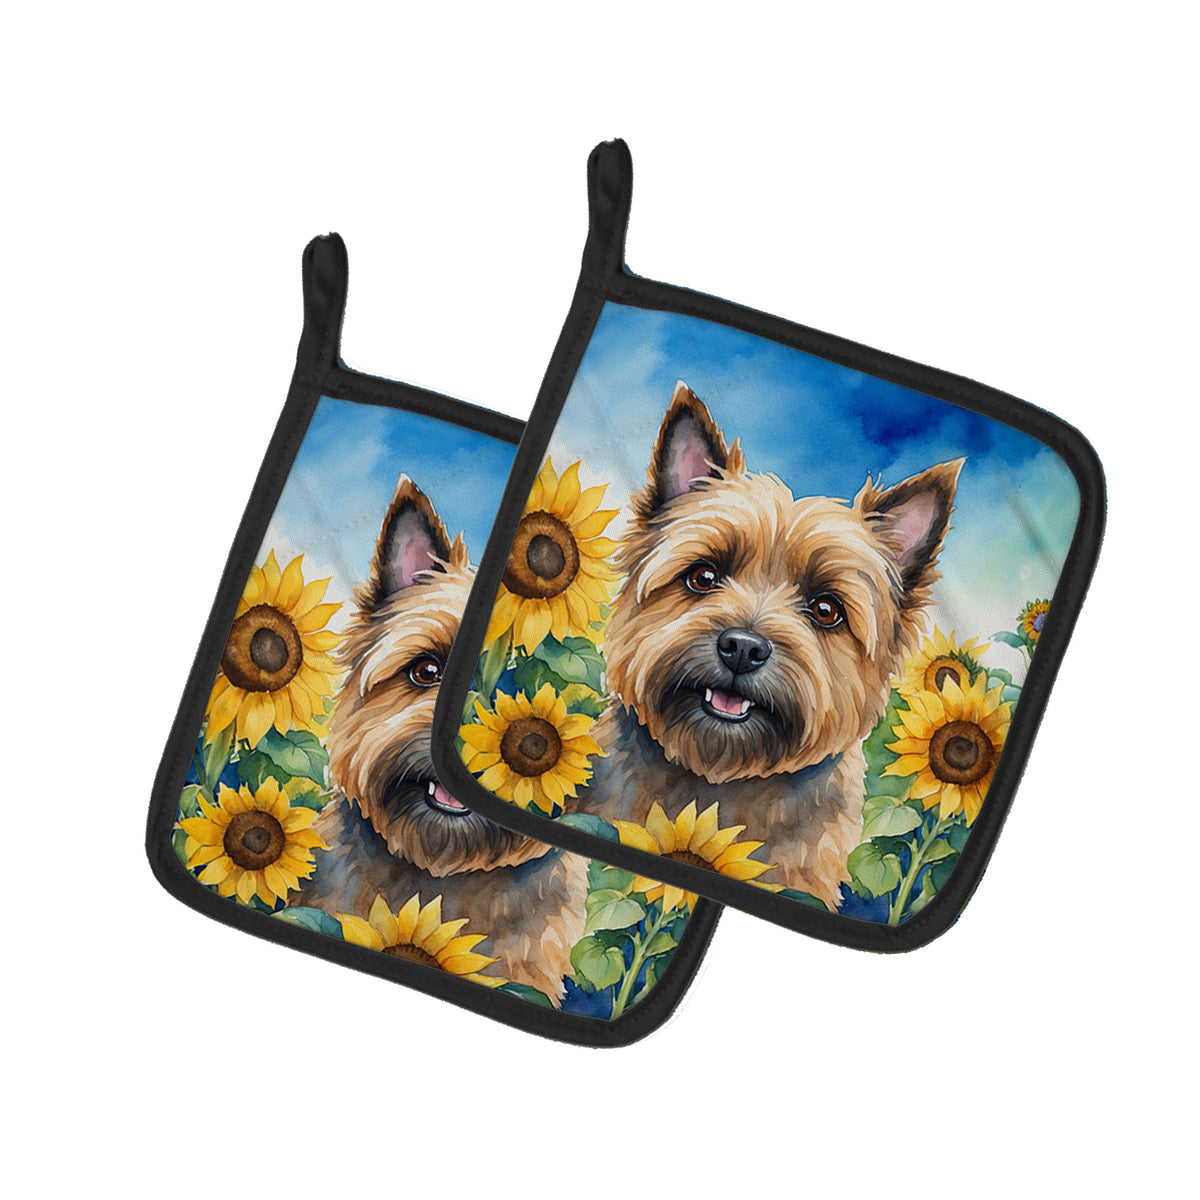 Buy this Cairn Terrier in Sunflowers Pair of Pot Holders